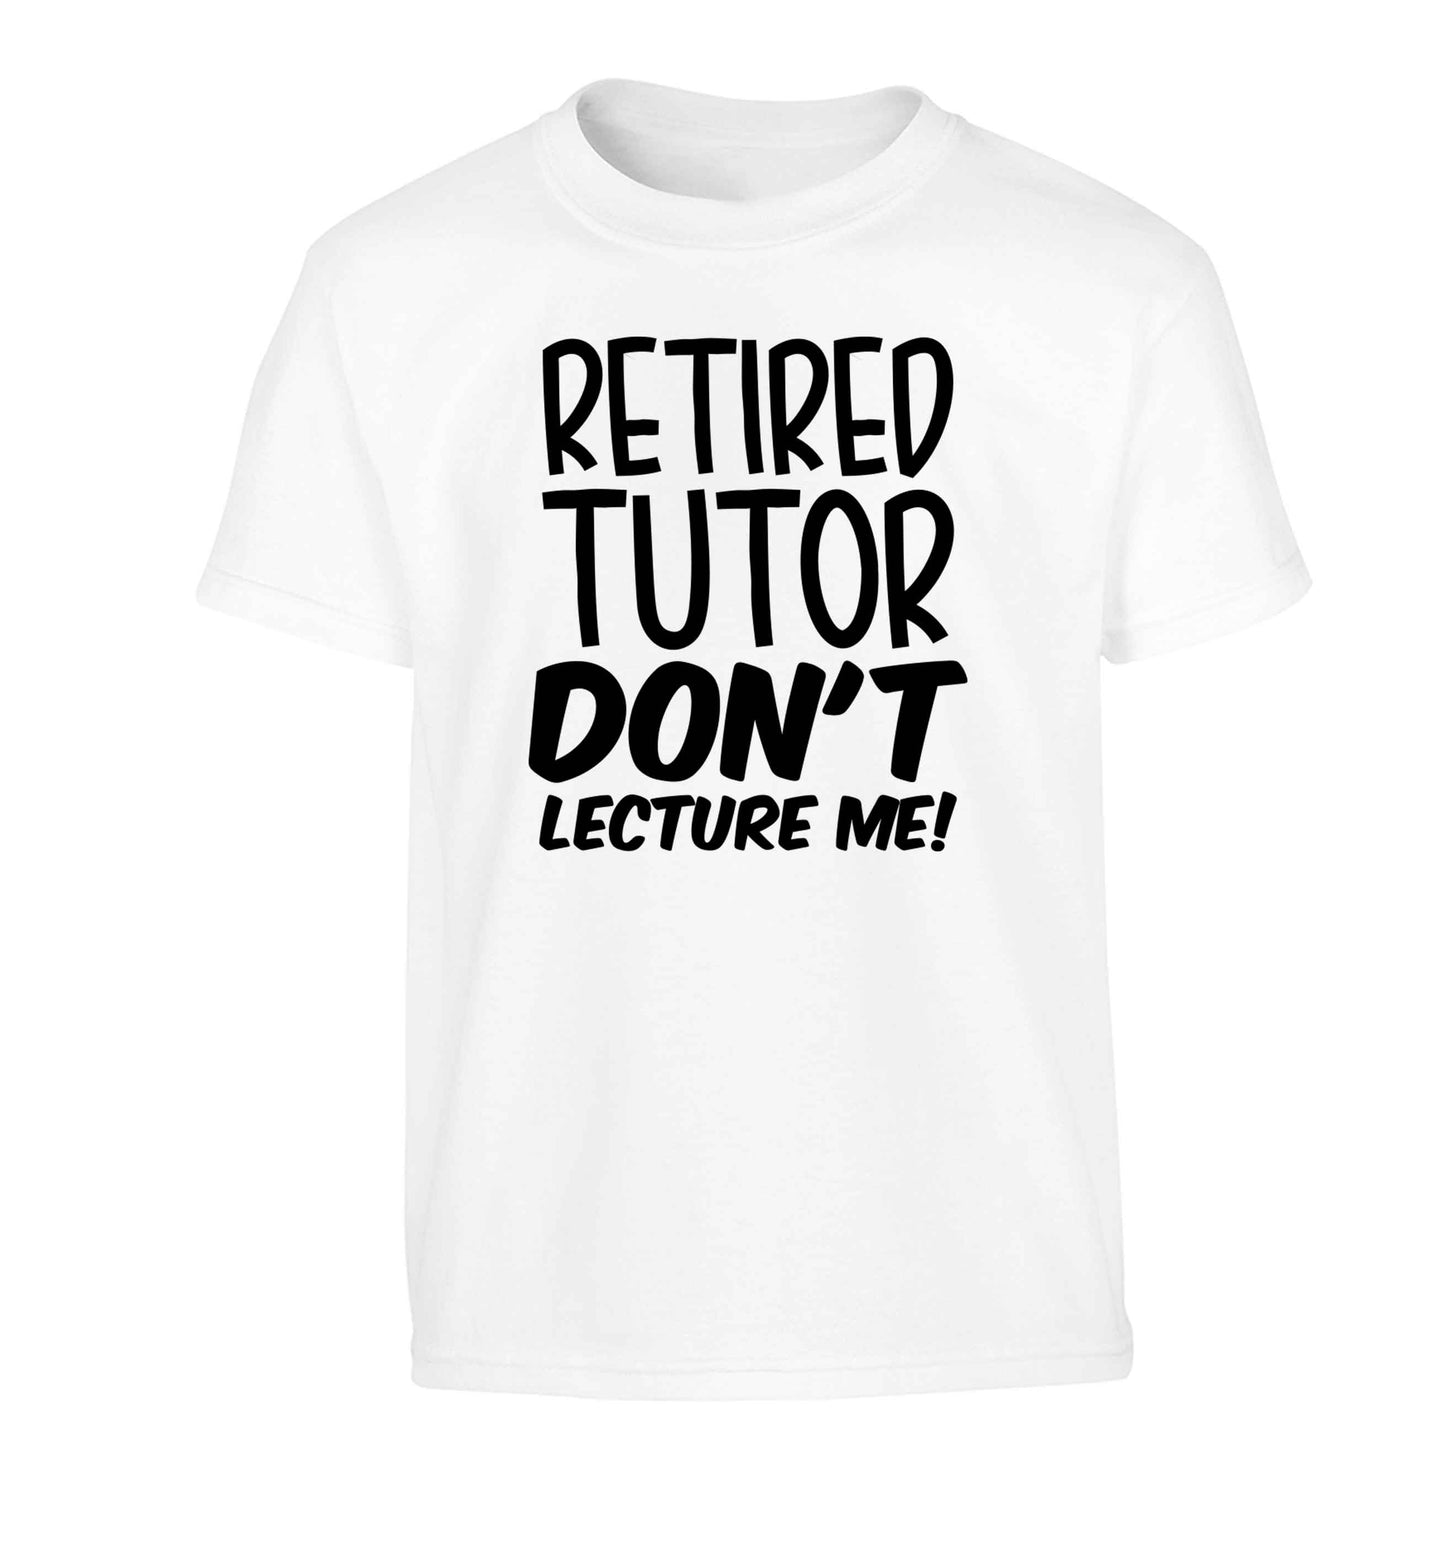 Retired tutor don't lecture me! Children's white Tshirt 12-13 Years